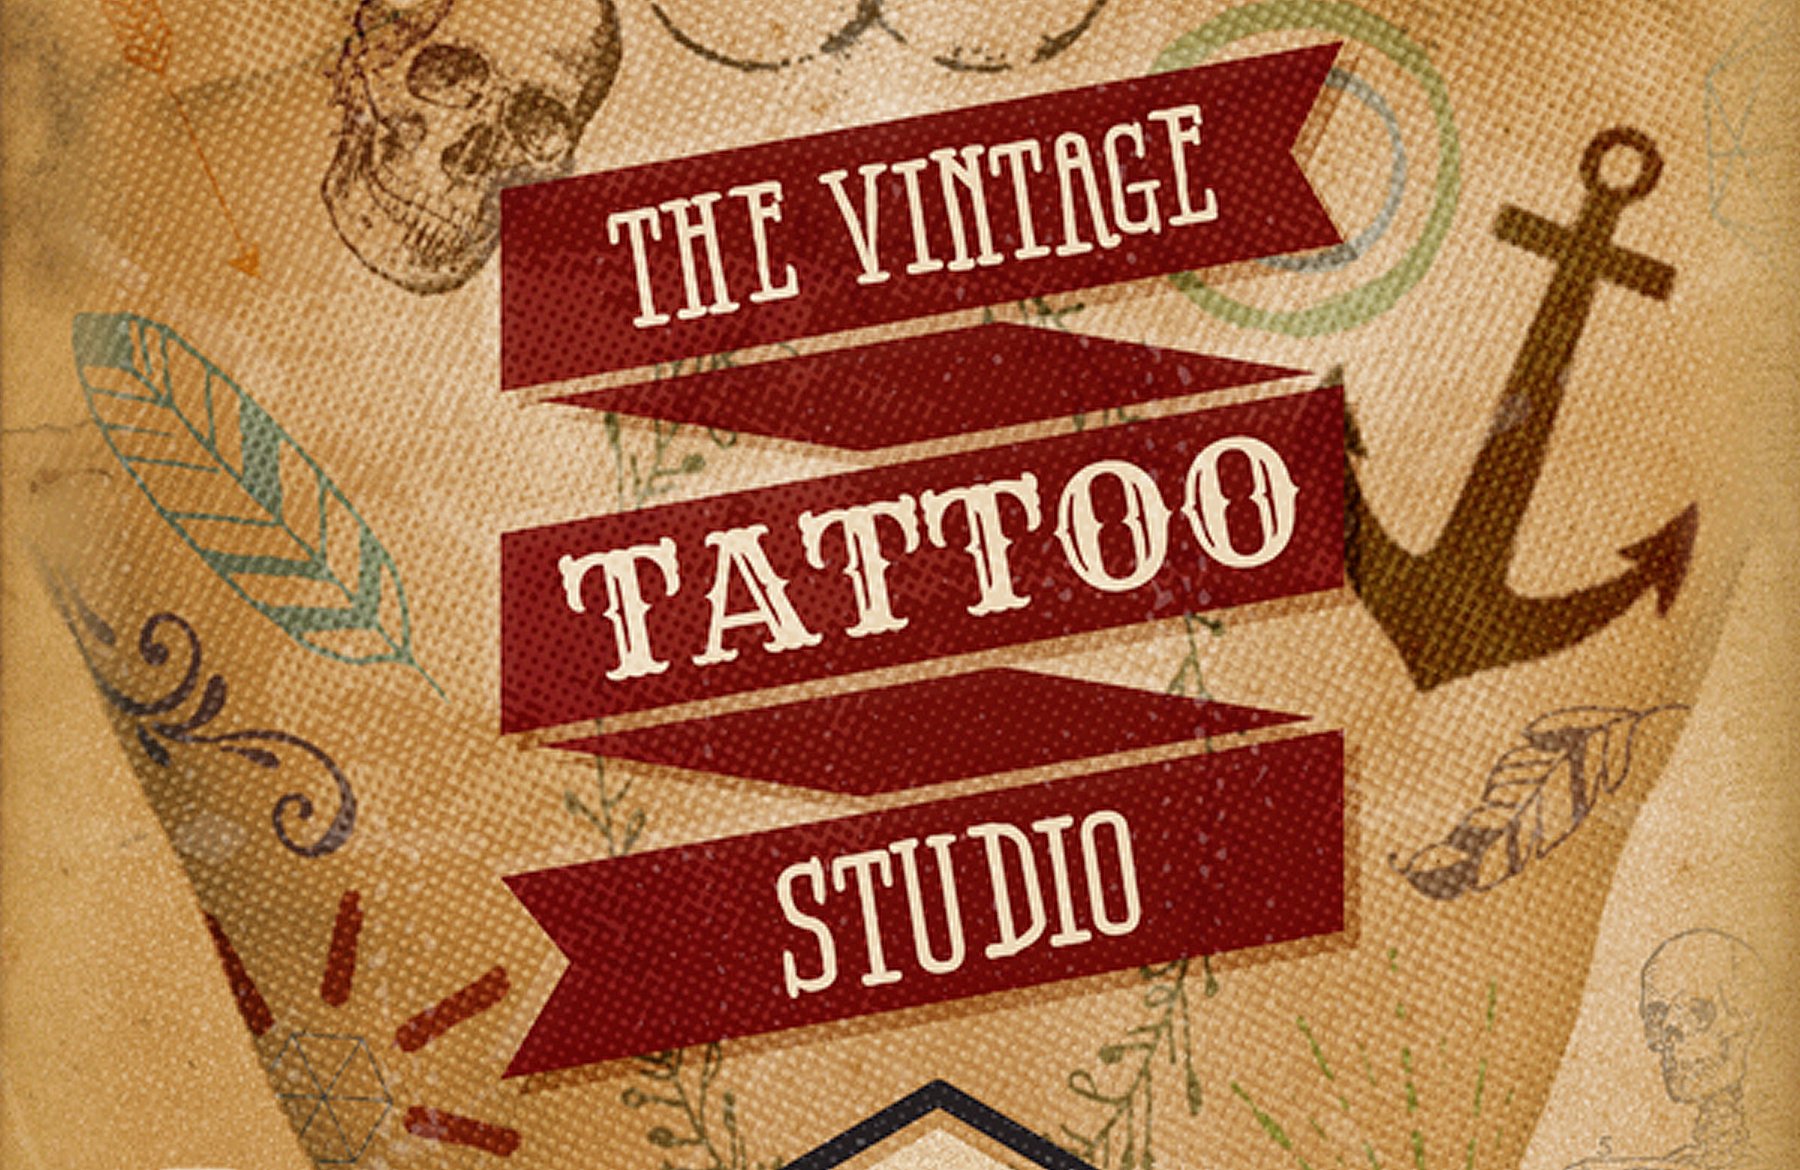 TATTOO STUDIO BANNER Template | PosterMyWall